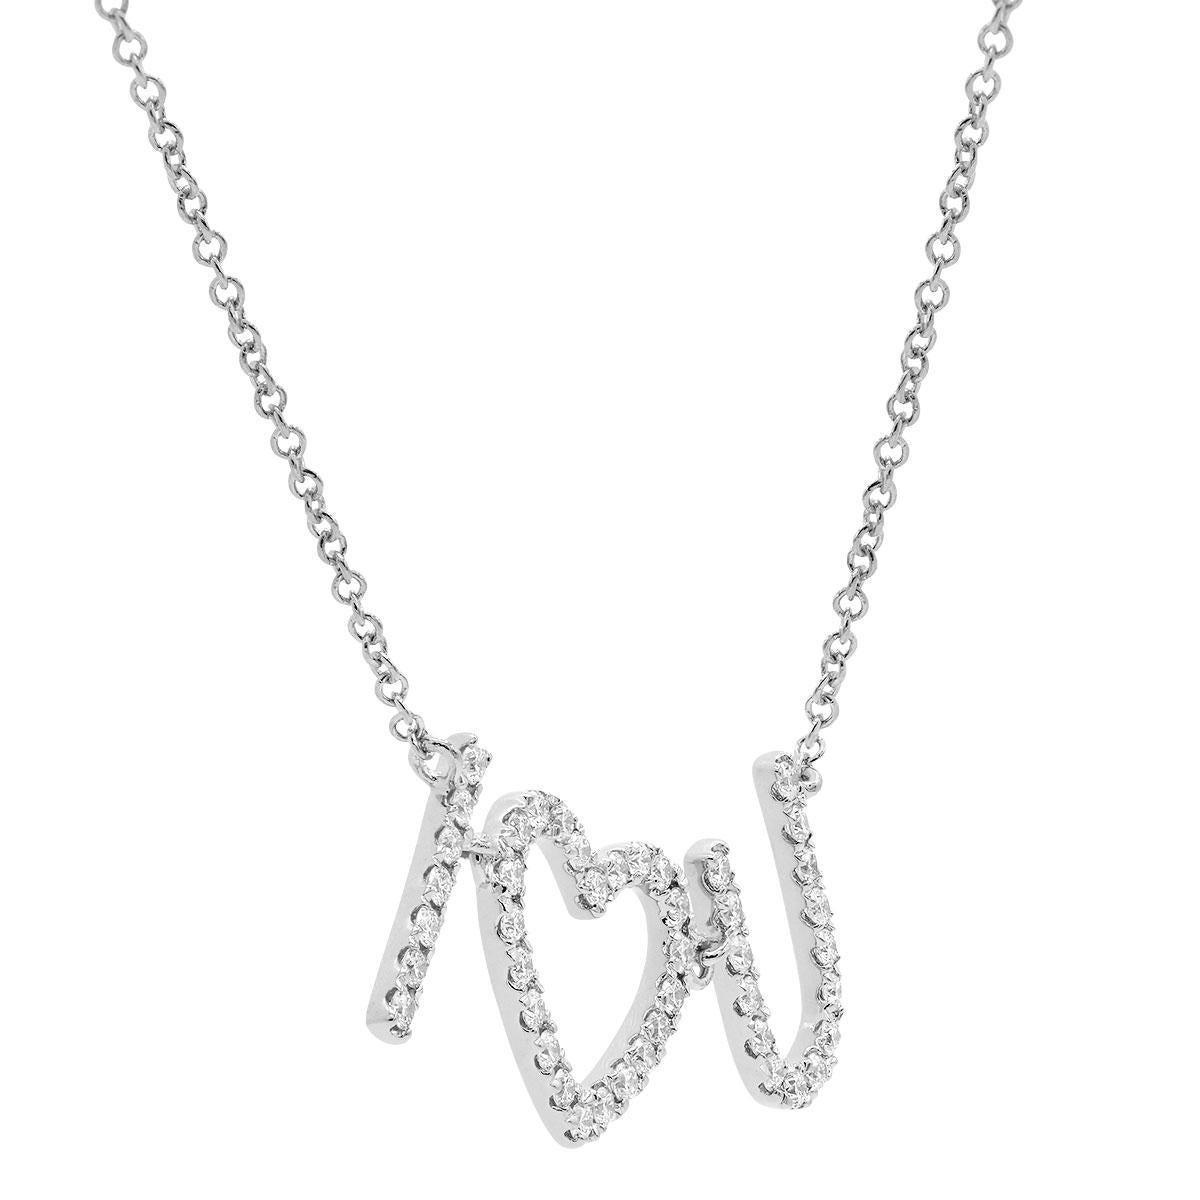 With this exquisite white gold necklace, style and glamour are in the spotlight. This 14-karat necklace is made from 1.3 grams of gold. This necklace is adorned with SI-SI2, GH color diamonds, made out of 44 diamonds totaling 0.34 carats. This